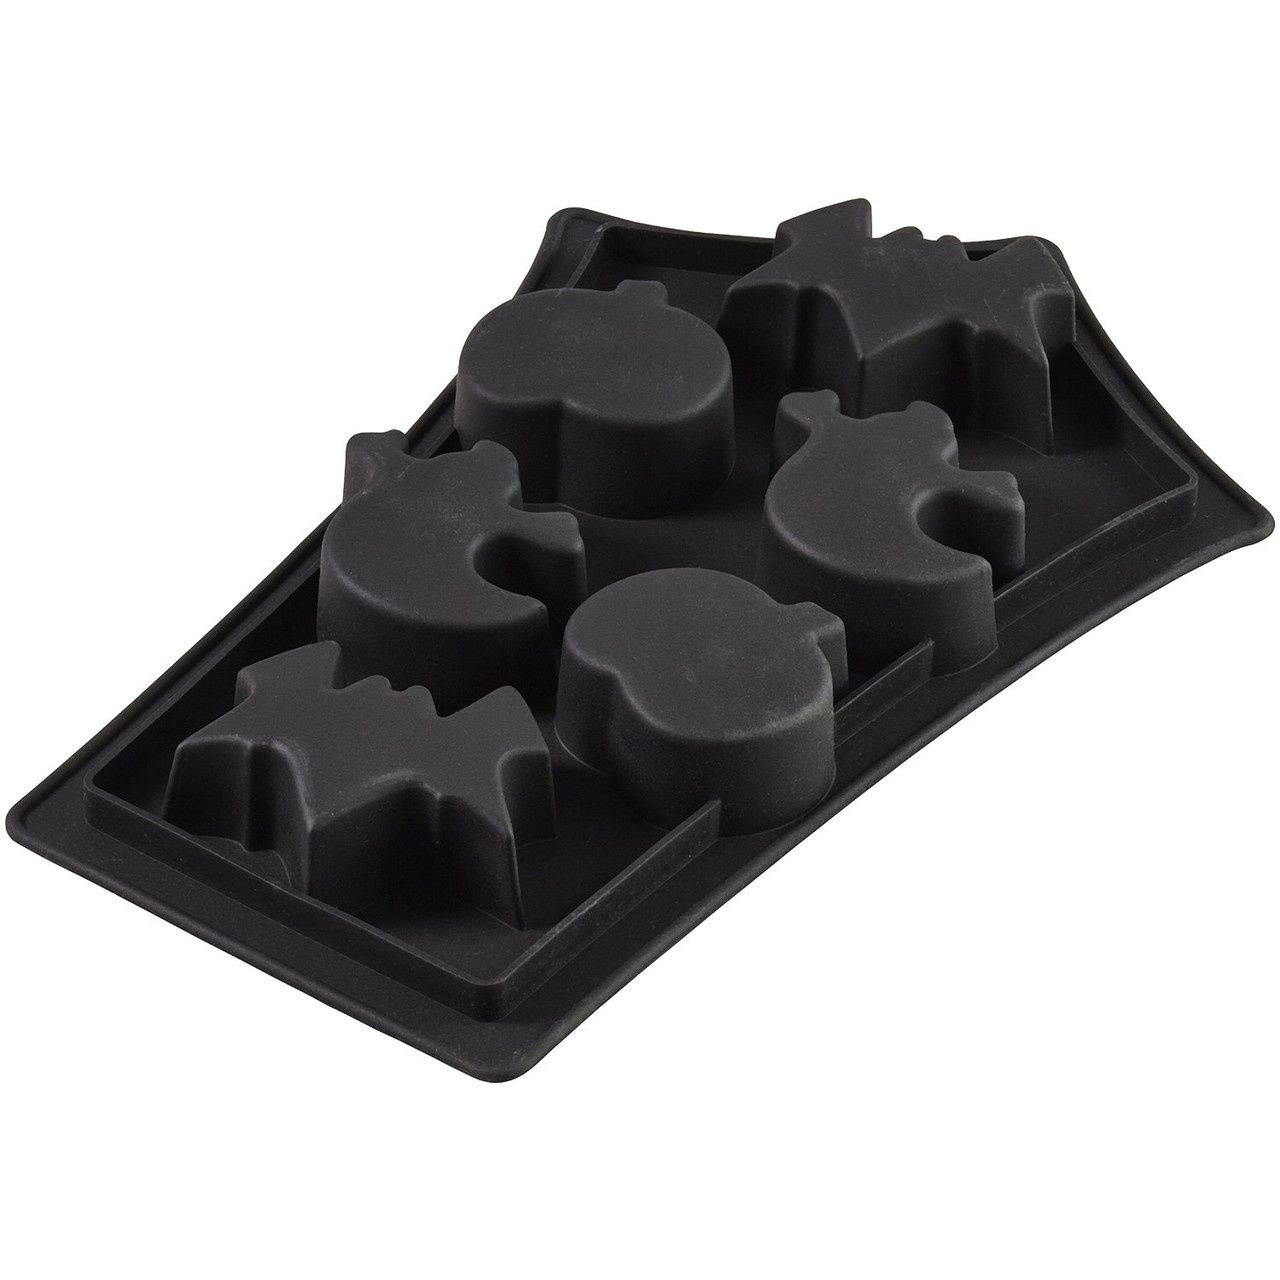 Coffin Cake Silicone Mold Pan, Great Housewarming Gift for Goths or  Witches, Use for Halloween or for a Year-round Witchy Kitchen 